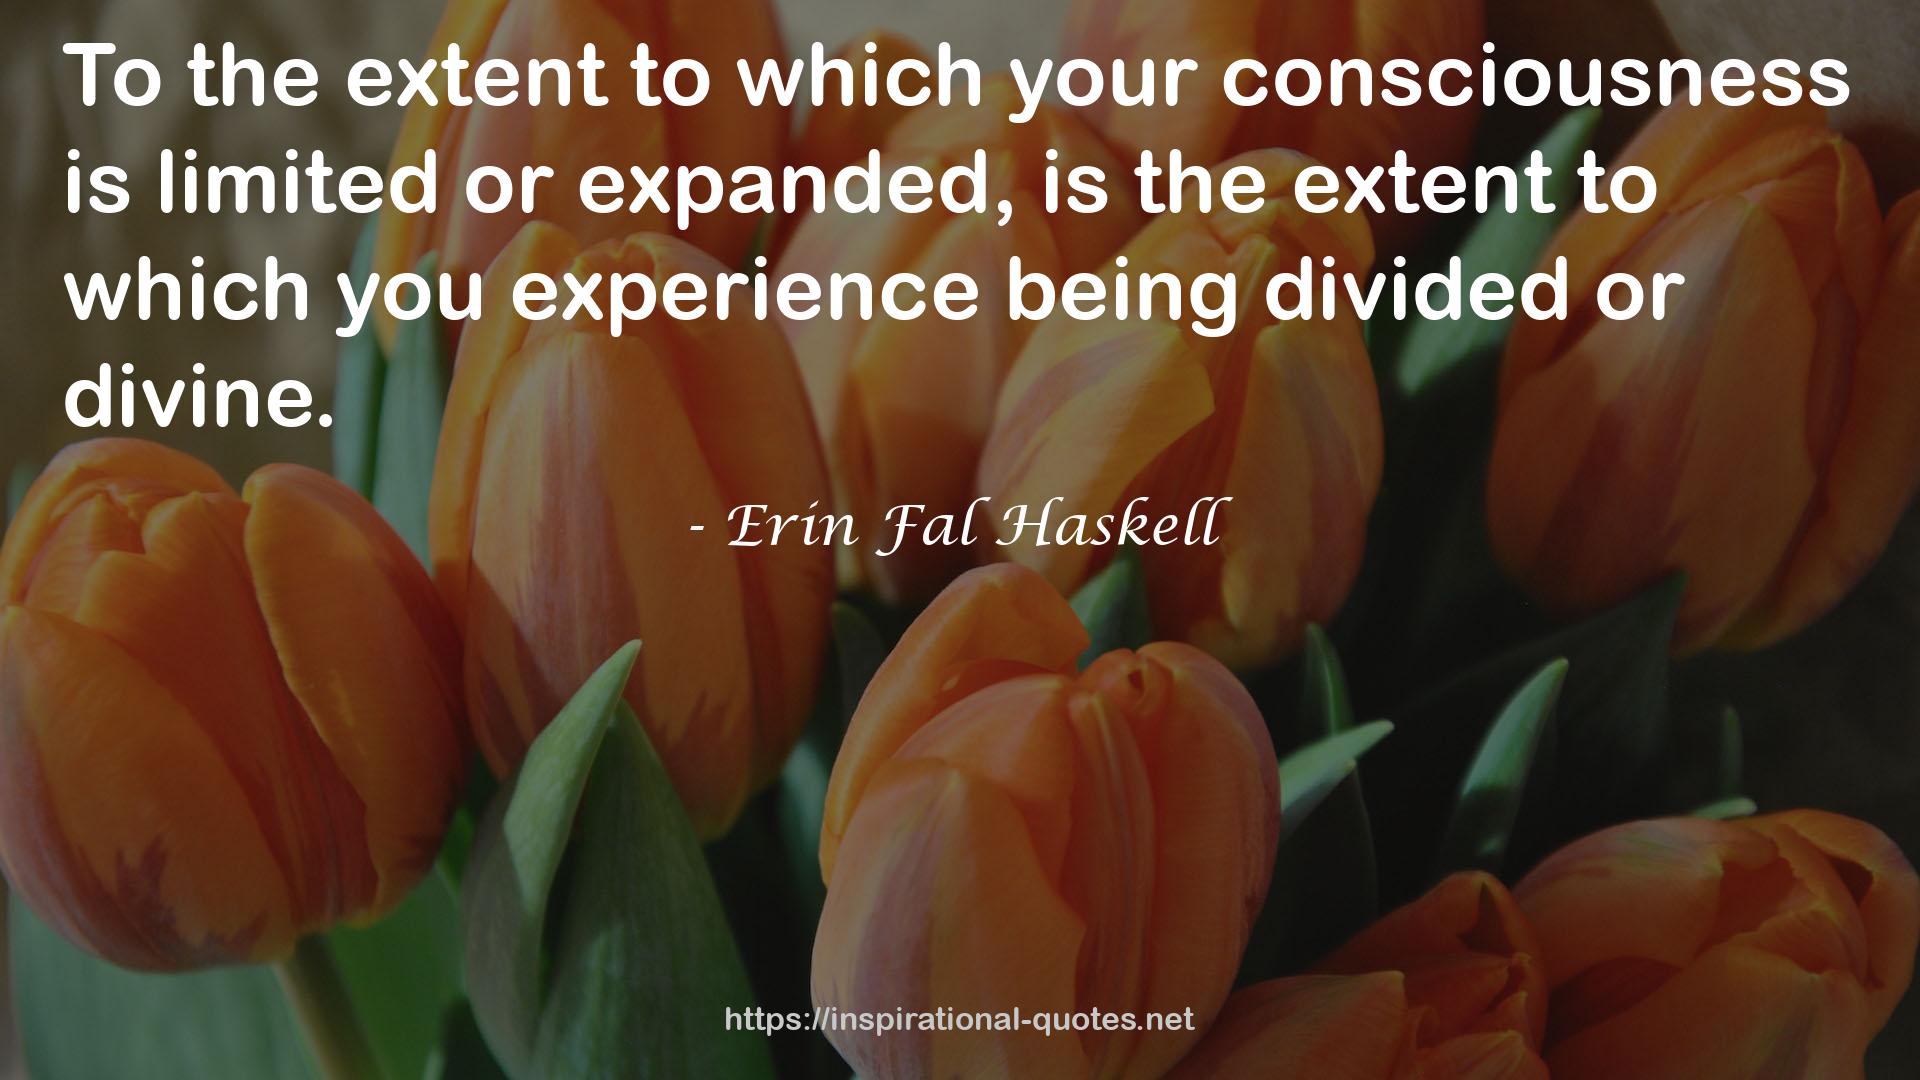 Erin Fal Haskell QUOTES